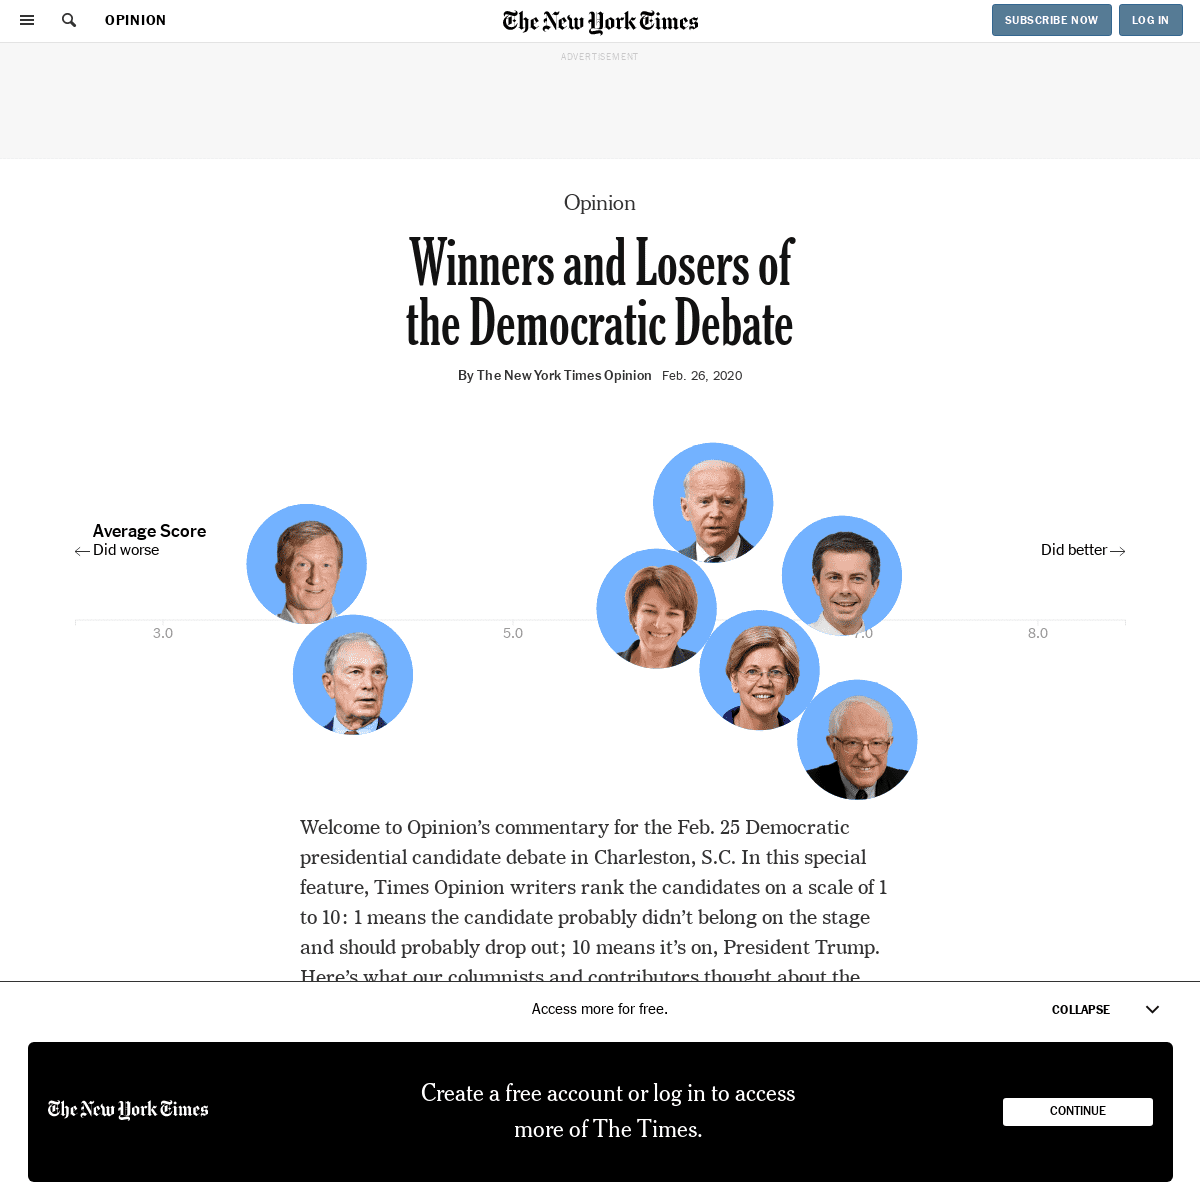 A complete backup of www.nytimes.com/interactive/2020/02/26/opinion/democratic-debate-winners-losers.html